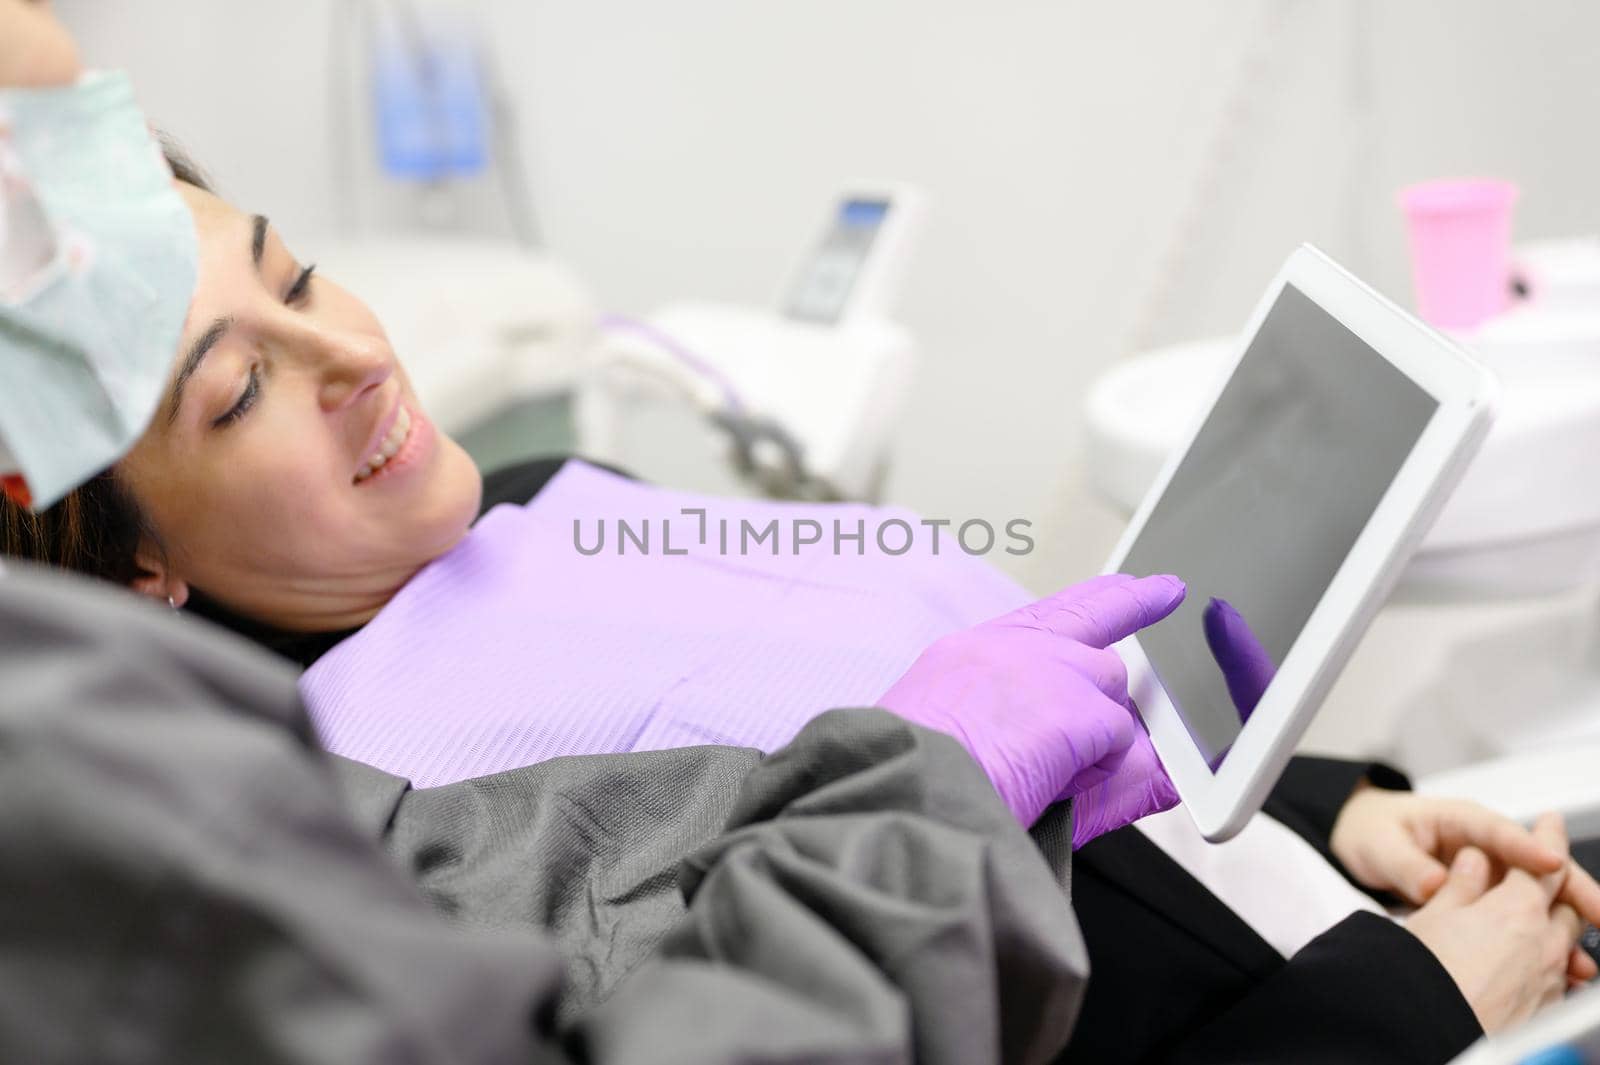 Health care concept - Female dentist showing tablet computer to woman patient at dental clinic office. High quality photo